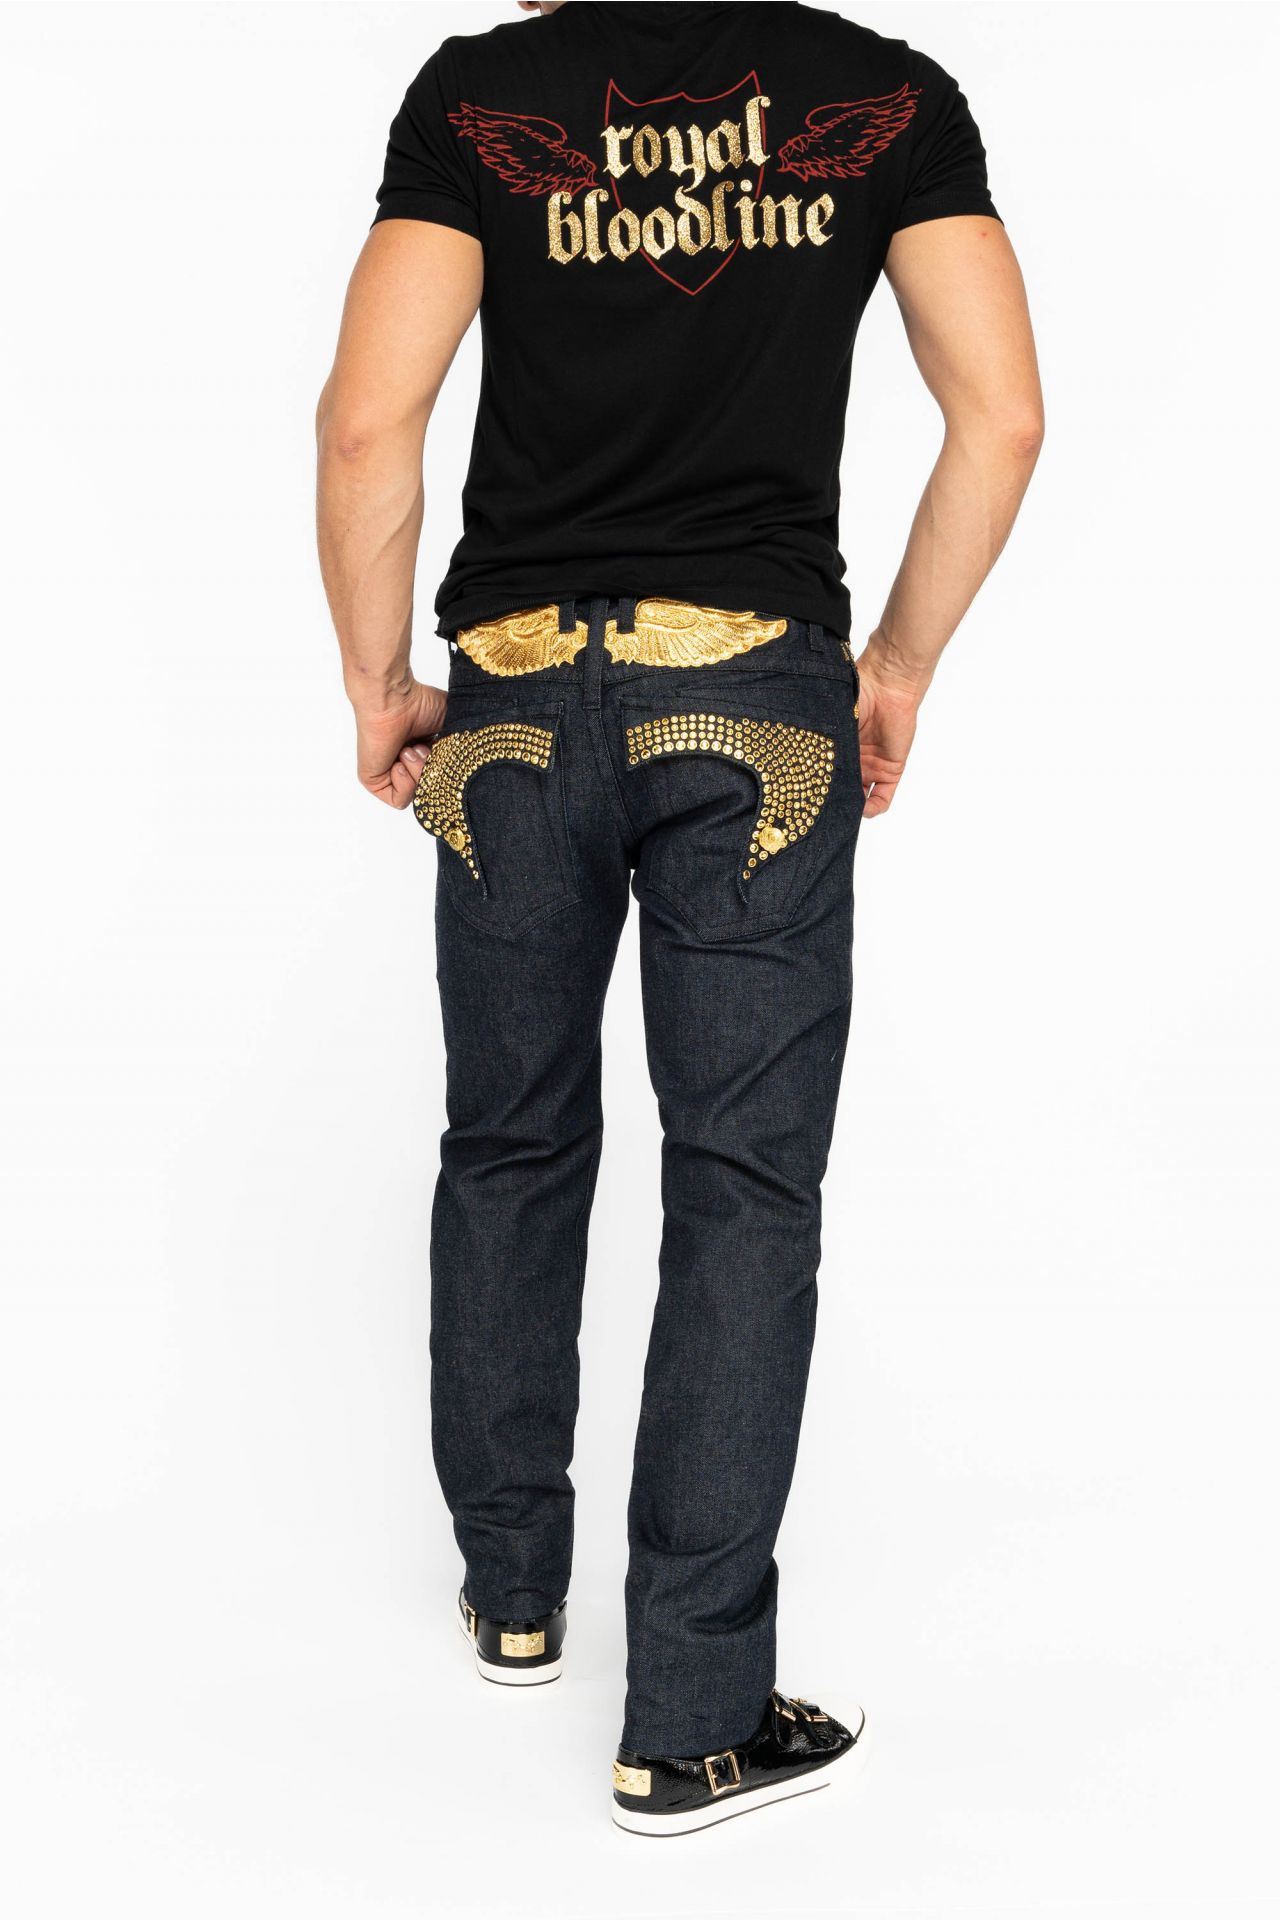 MENS RAW DENIM SLIM FIT KILLER FLAP JEANS WITH GOLD WINGS AND CRYSTALS